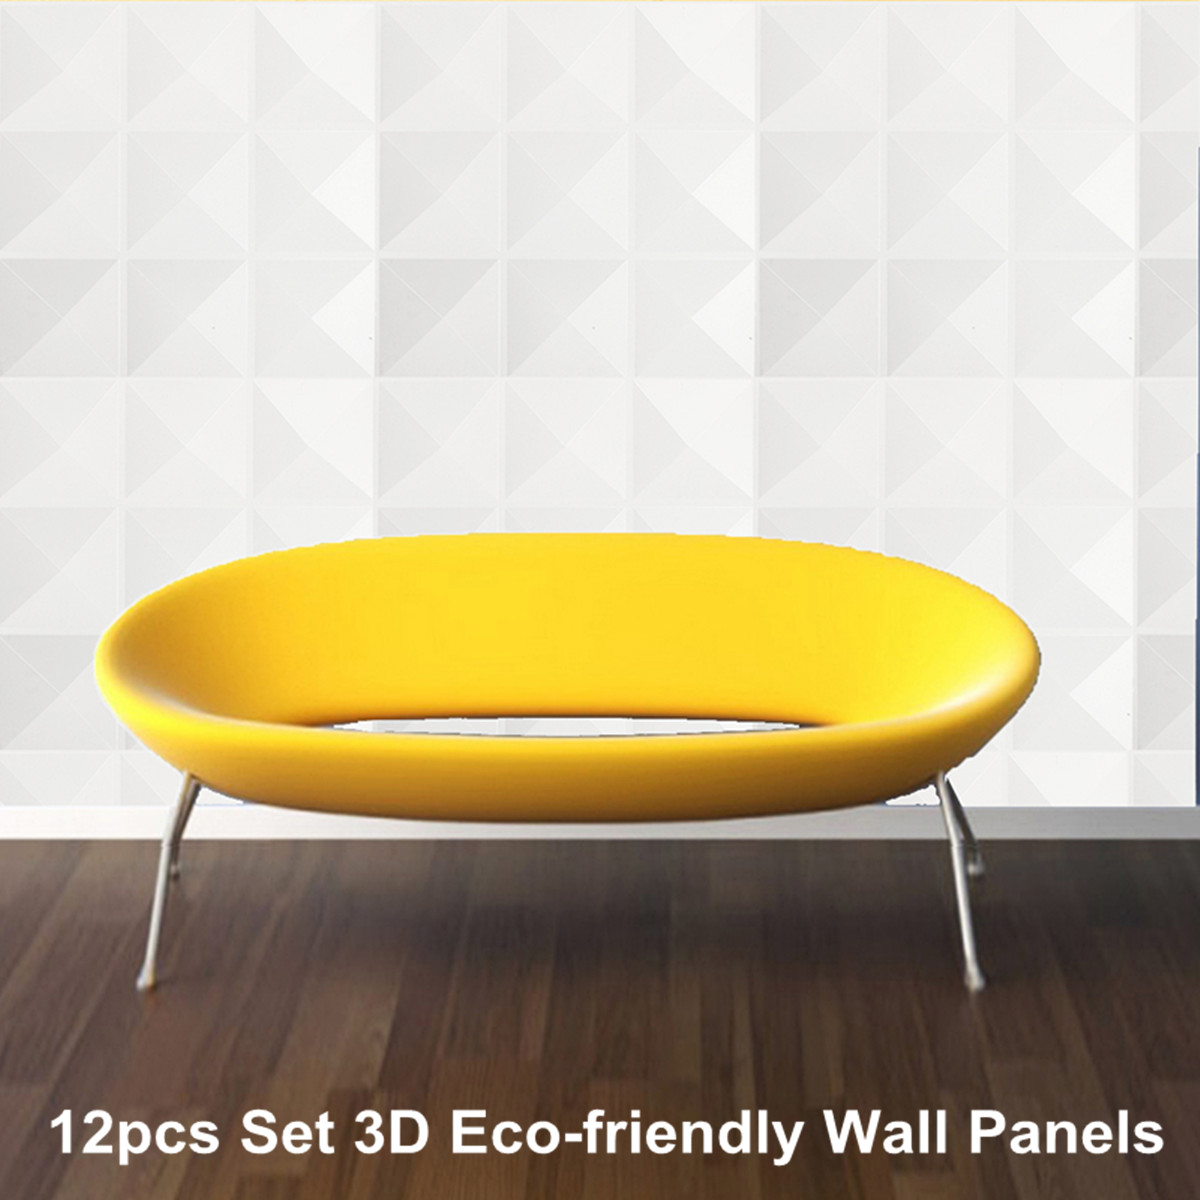 12pcs-Set-3D-Wall-Panel-EcoFriendly-Paintable-Cover-Home-Room-Background-Decals-32sqft-1354930-3